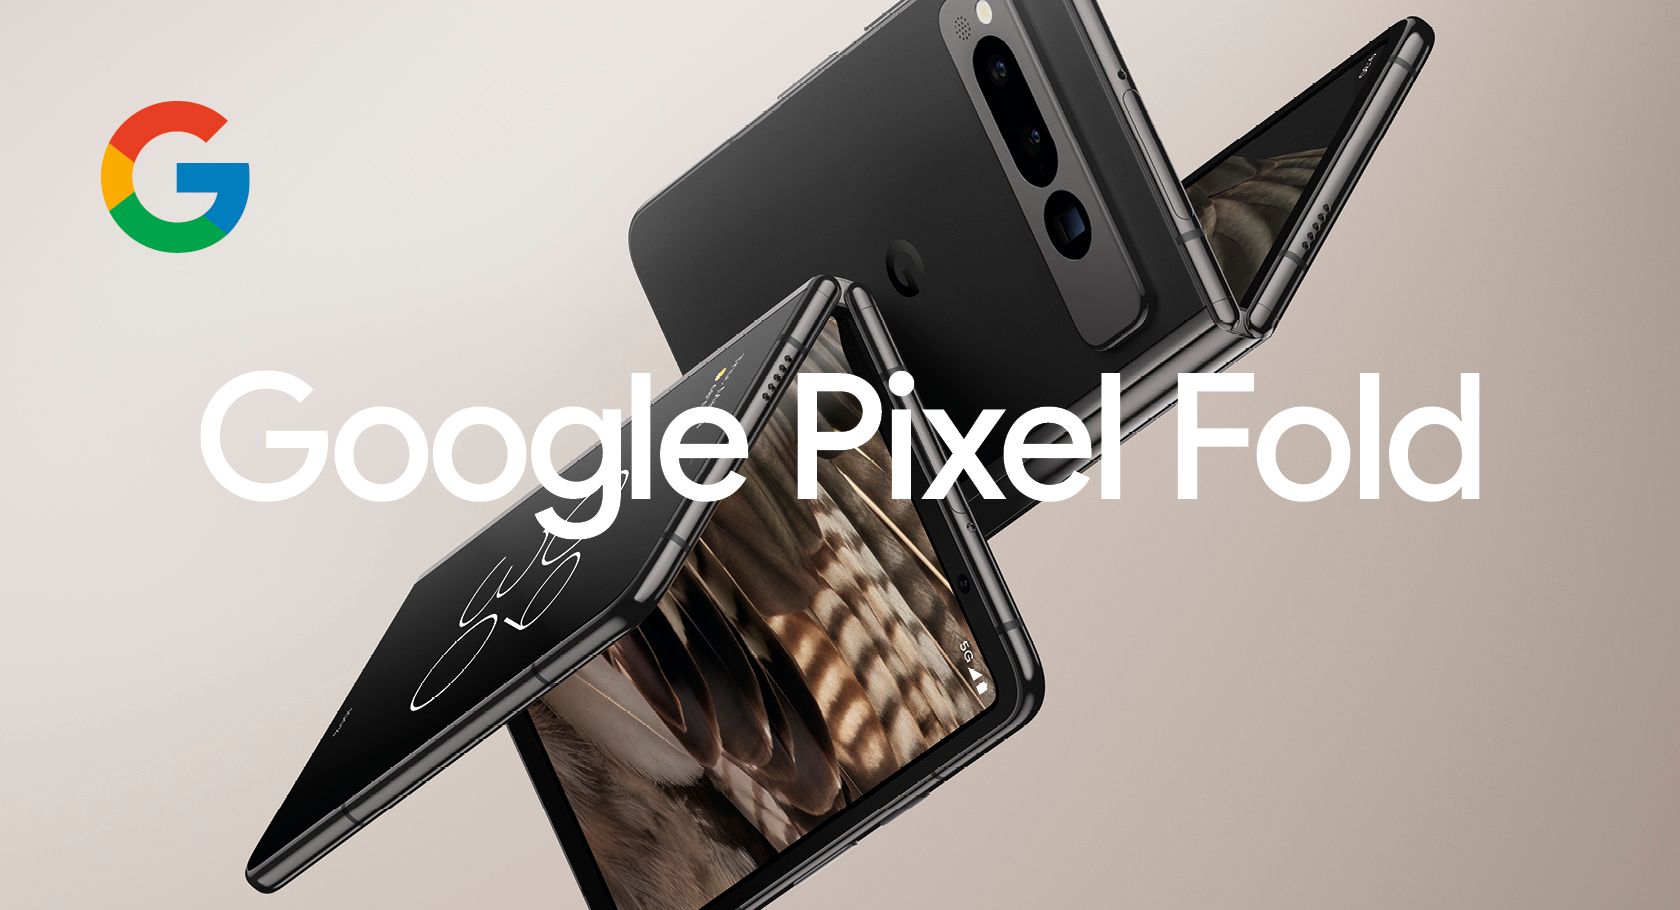 The Pixel Fold is Google's $1,800 entry into folding phones - The Verge